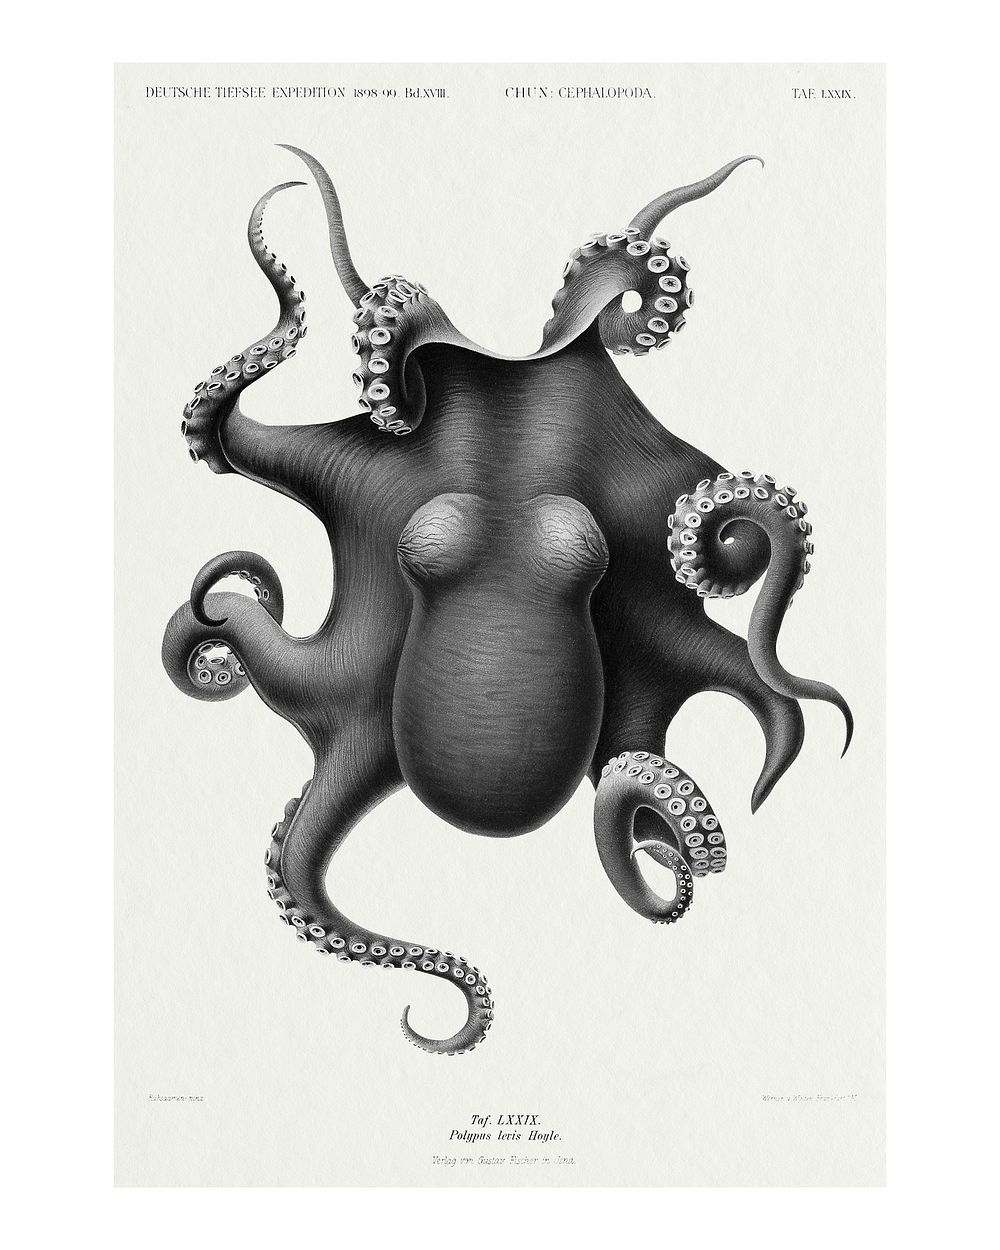 Vintage octopus illustration wall art print and poster. Remix from original painting by Carl Chun. 